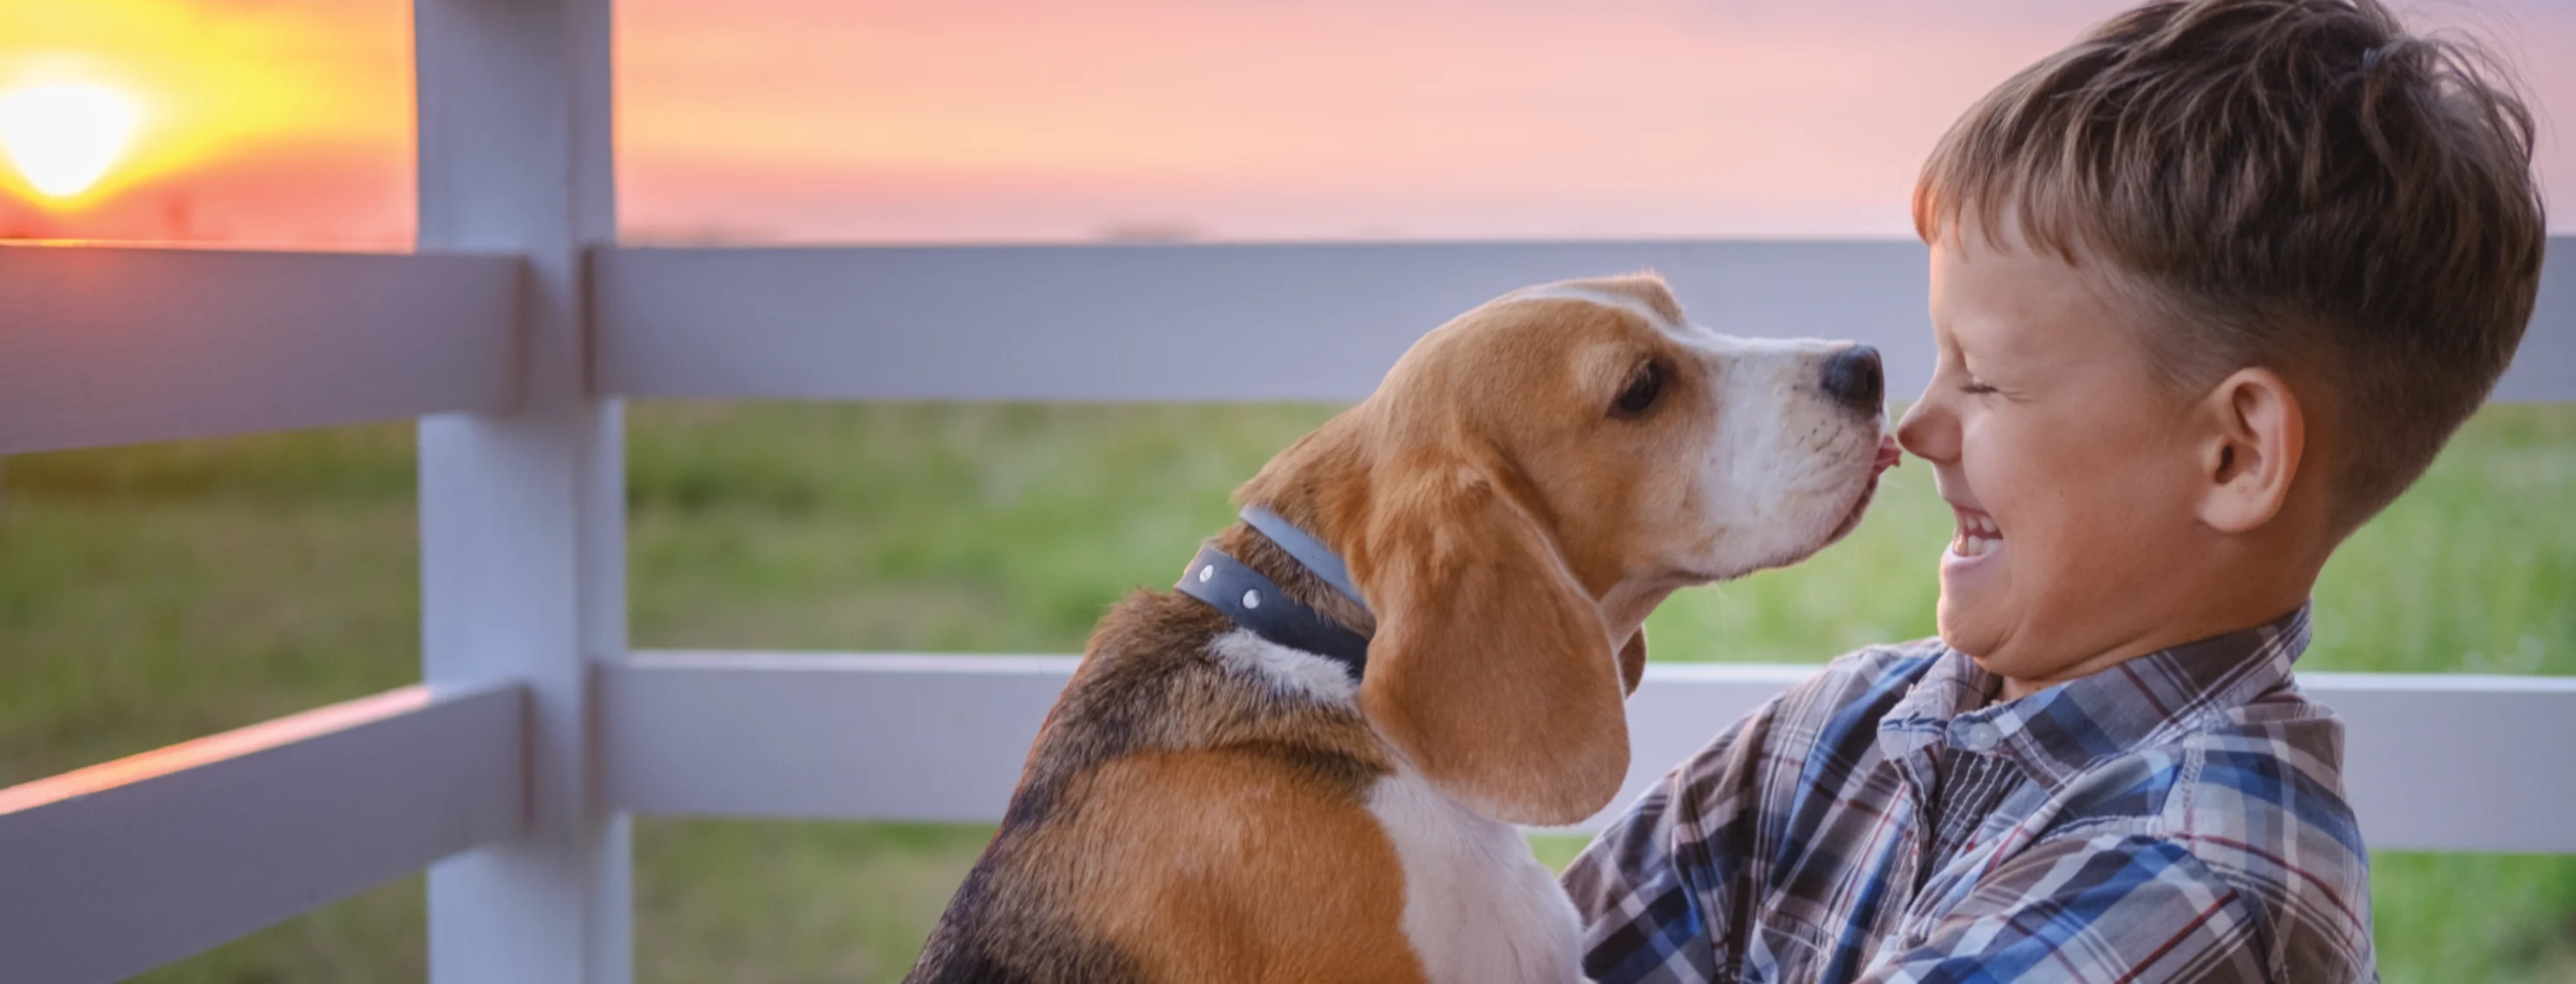 Dog and kid kissing with sunset in the background